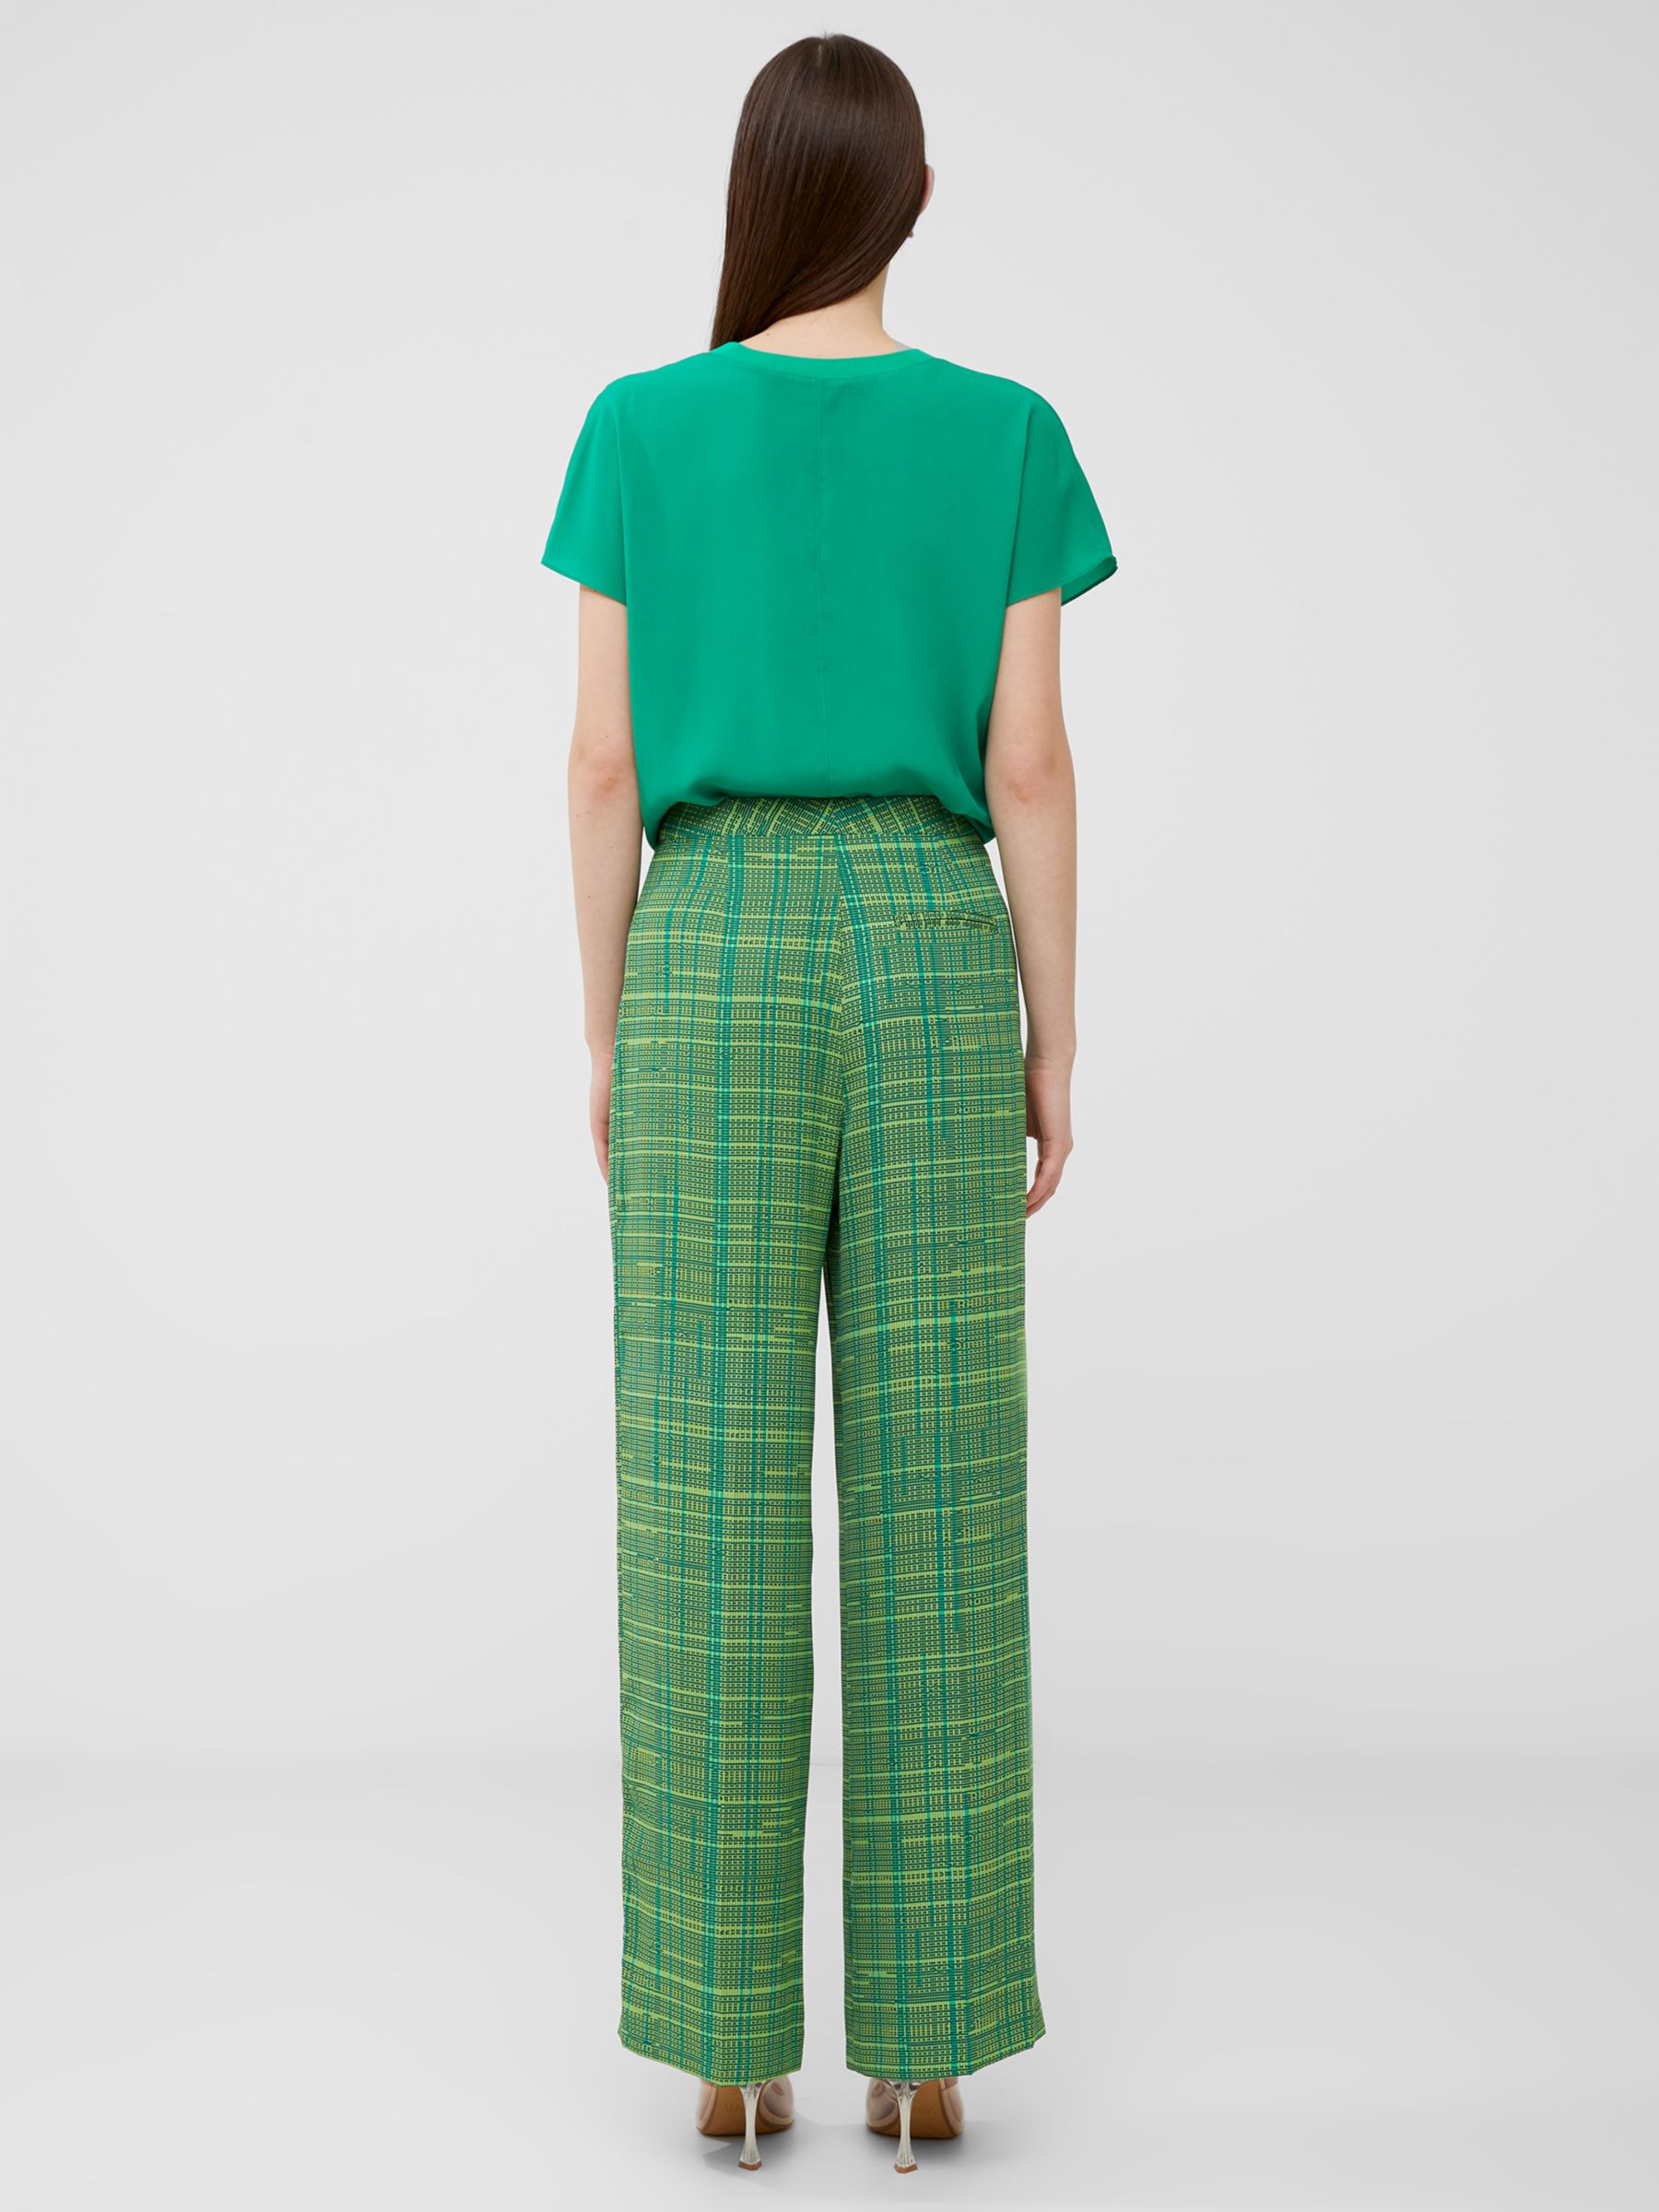 French Connection Carmen Crepe Trousers, Jelly Bean/Wasabi, 6